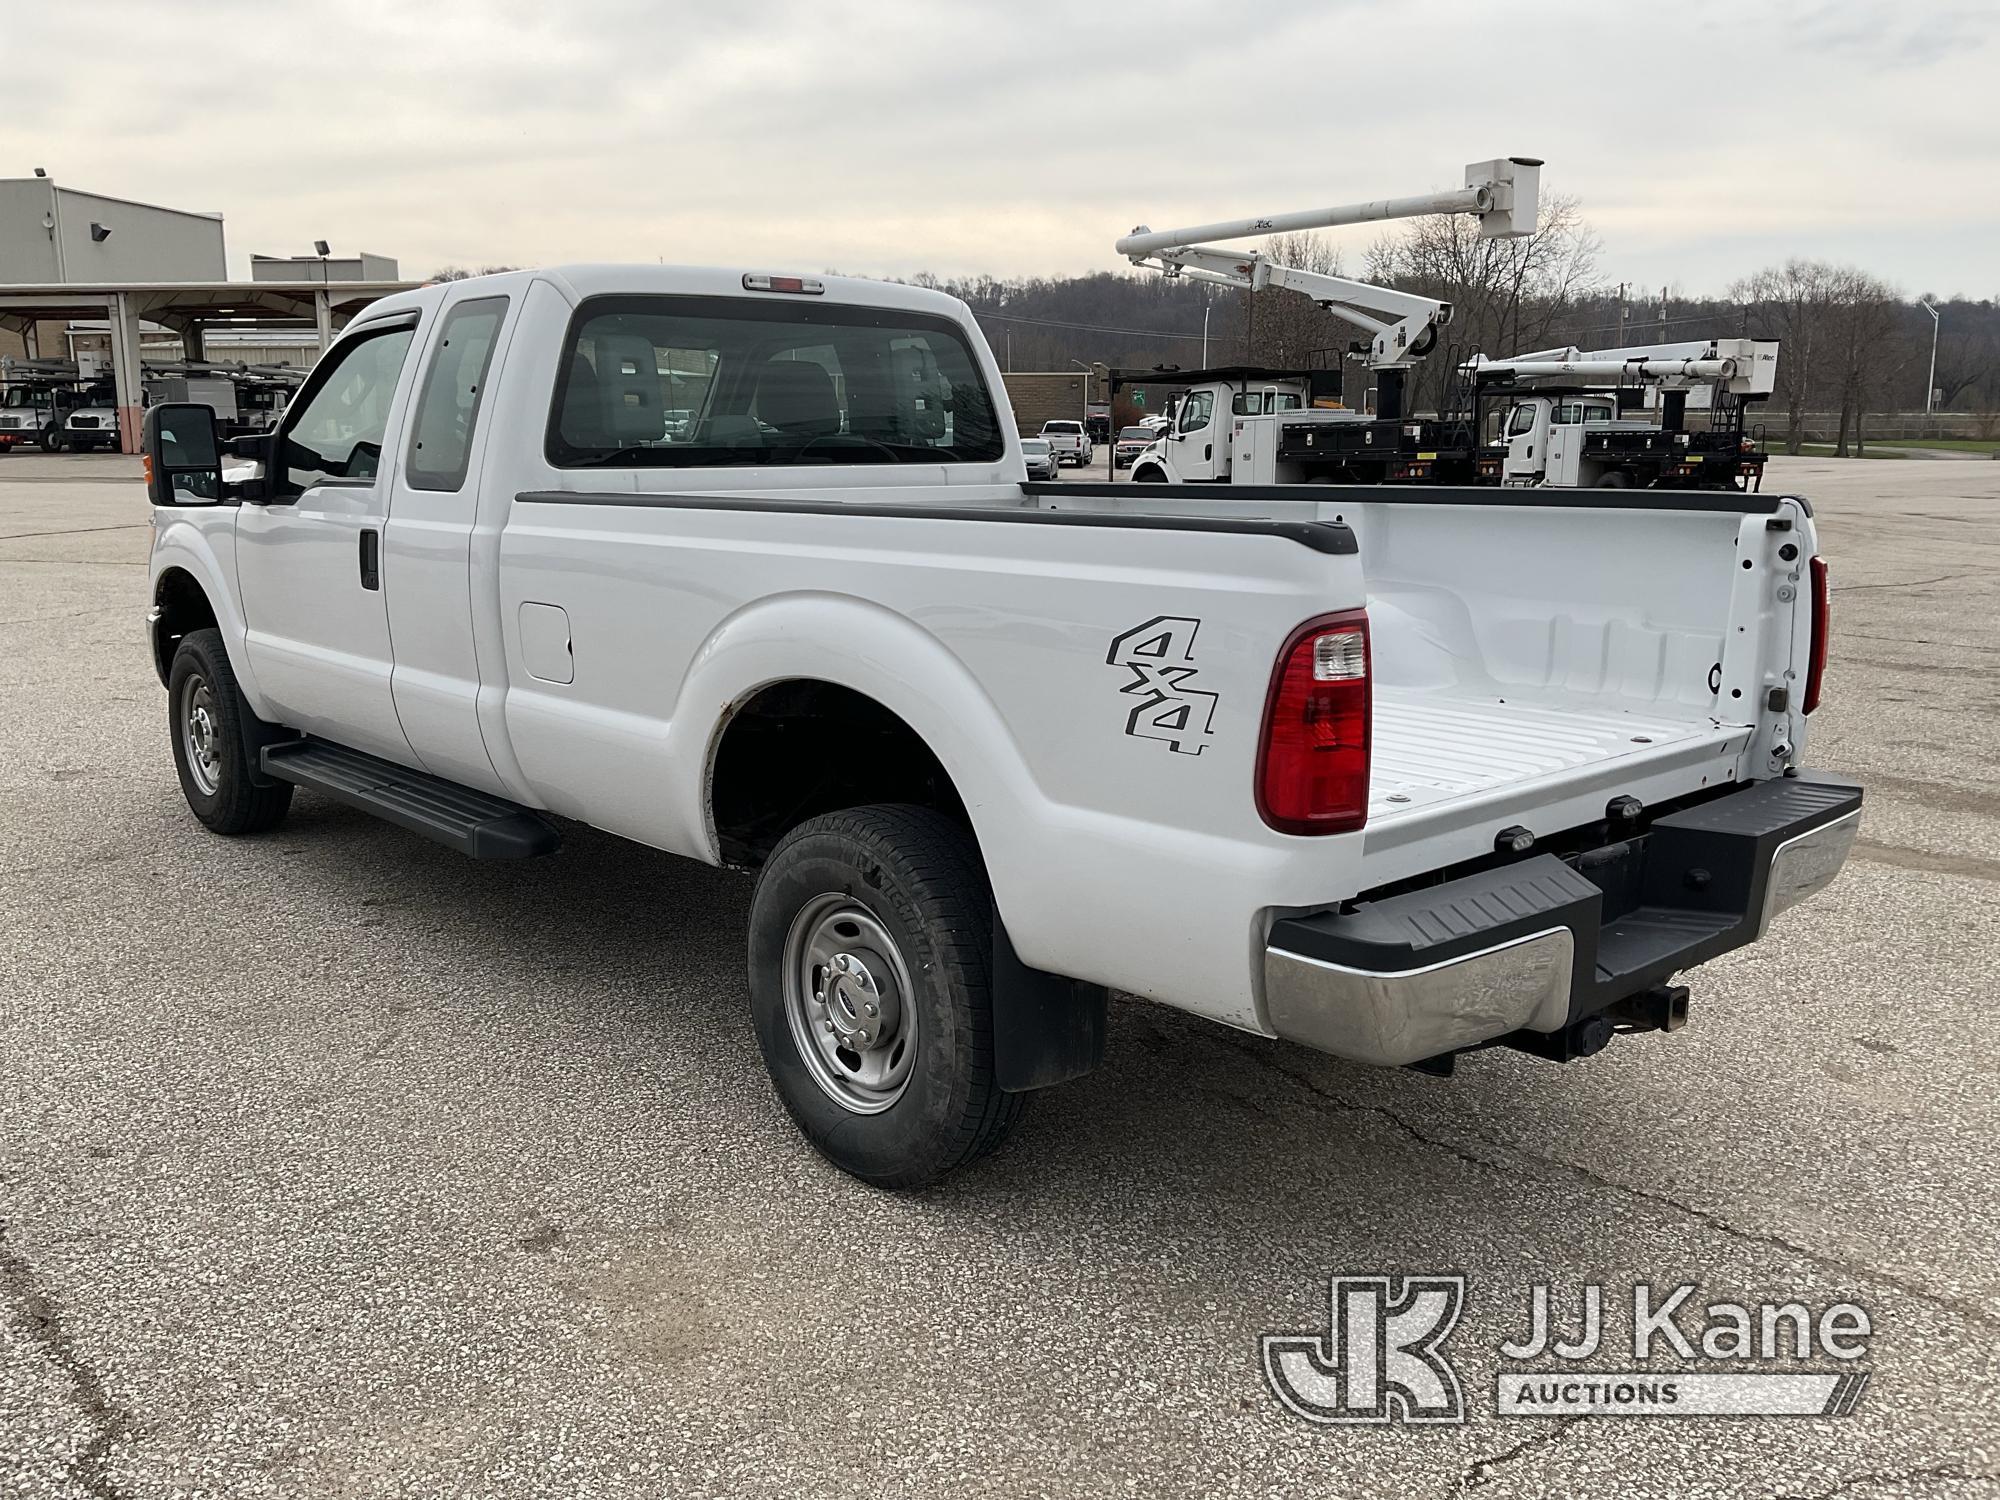 (Martinsville, IN) 2013 Ford F350 4x4 Extended-Cab Pickup Truck, Missing tailgate Runs & Moves